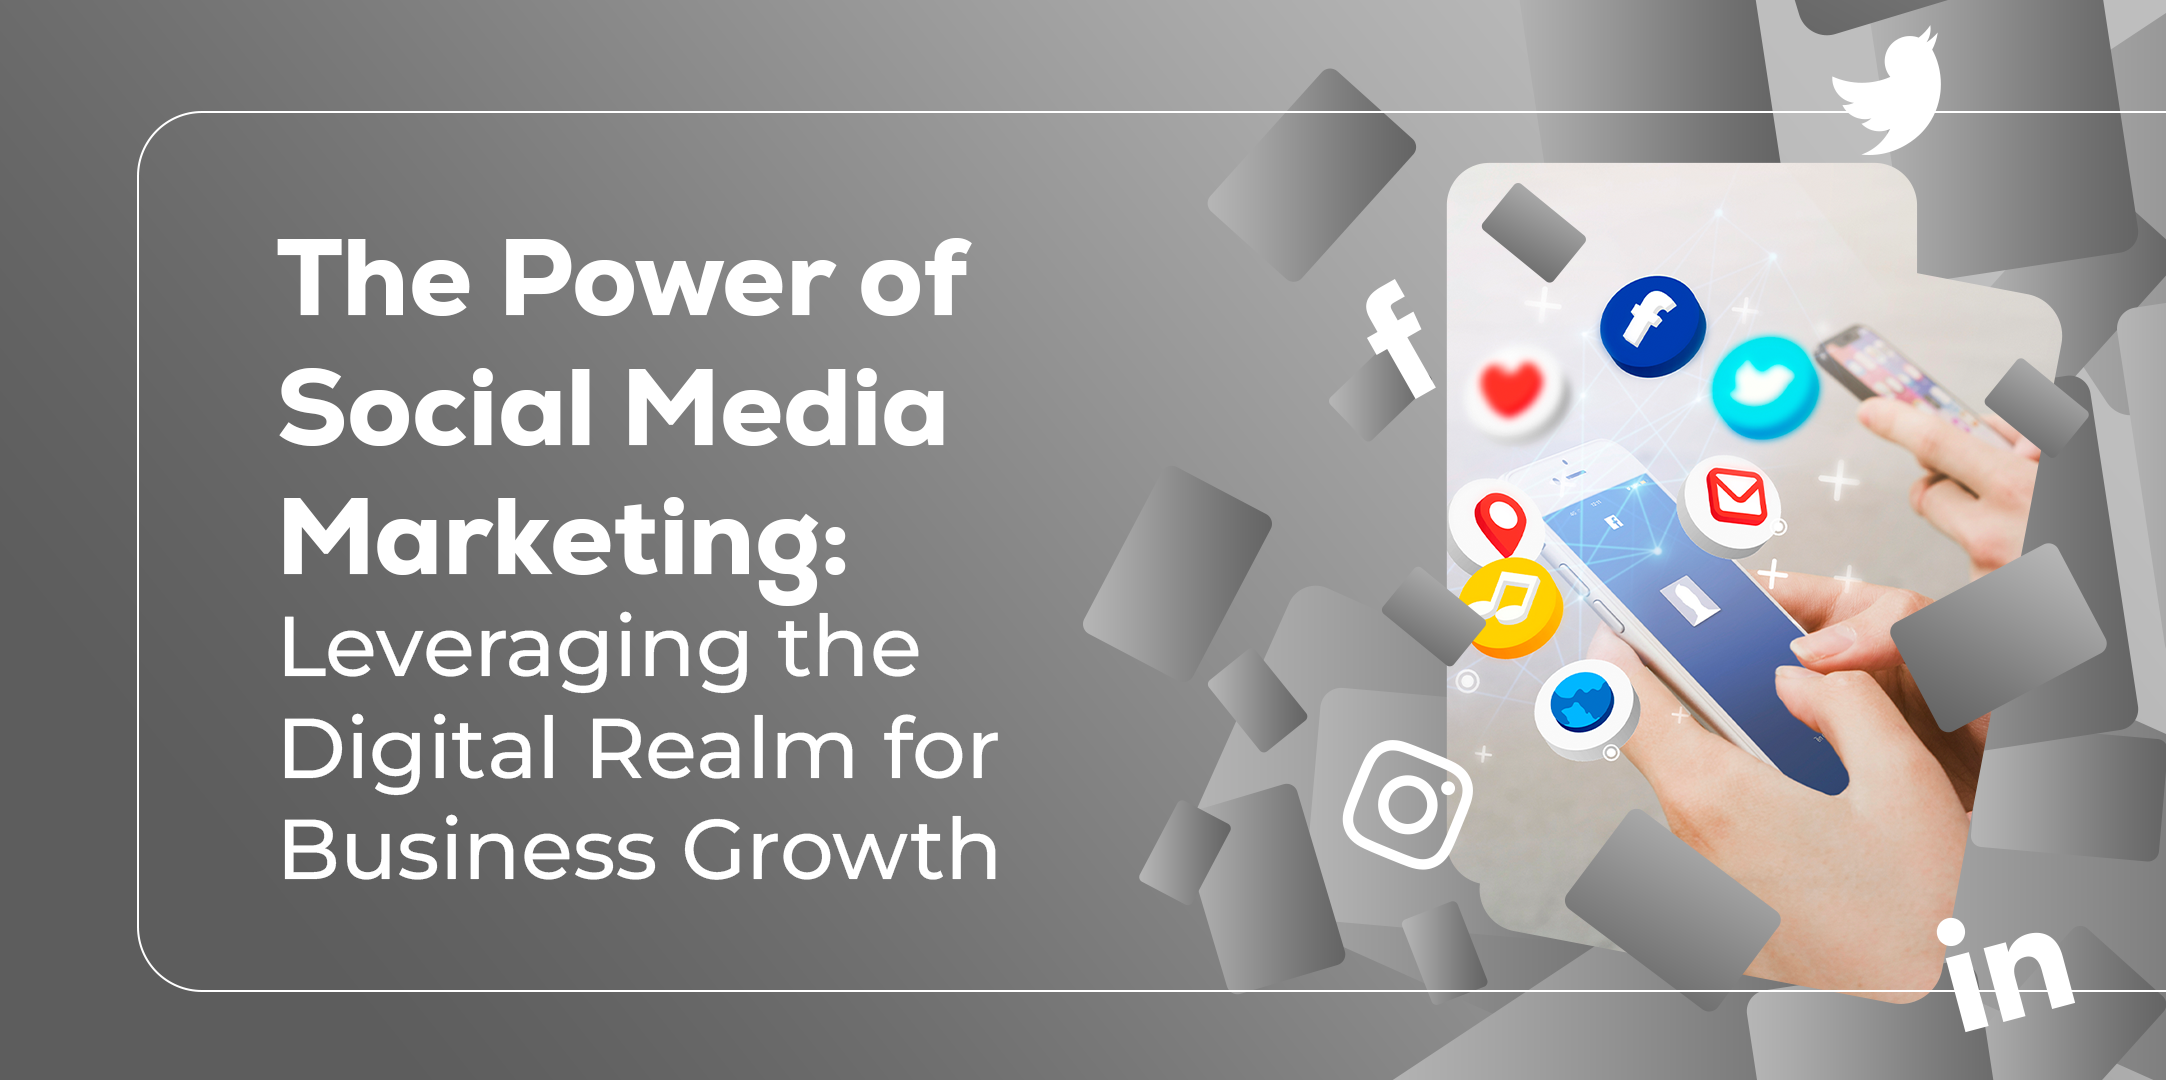 The Power of Social Media Marketing: Leveraging the Digital Realm for Business Growth 